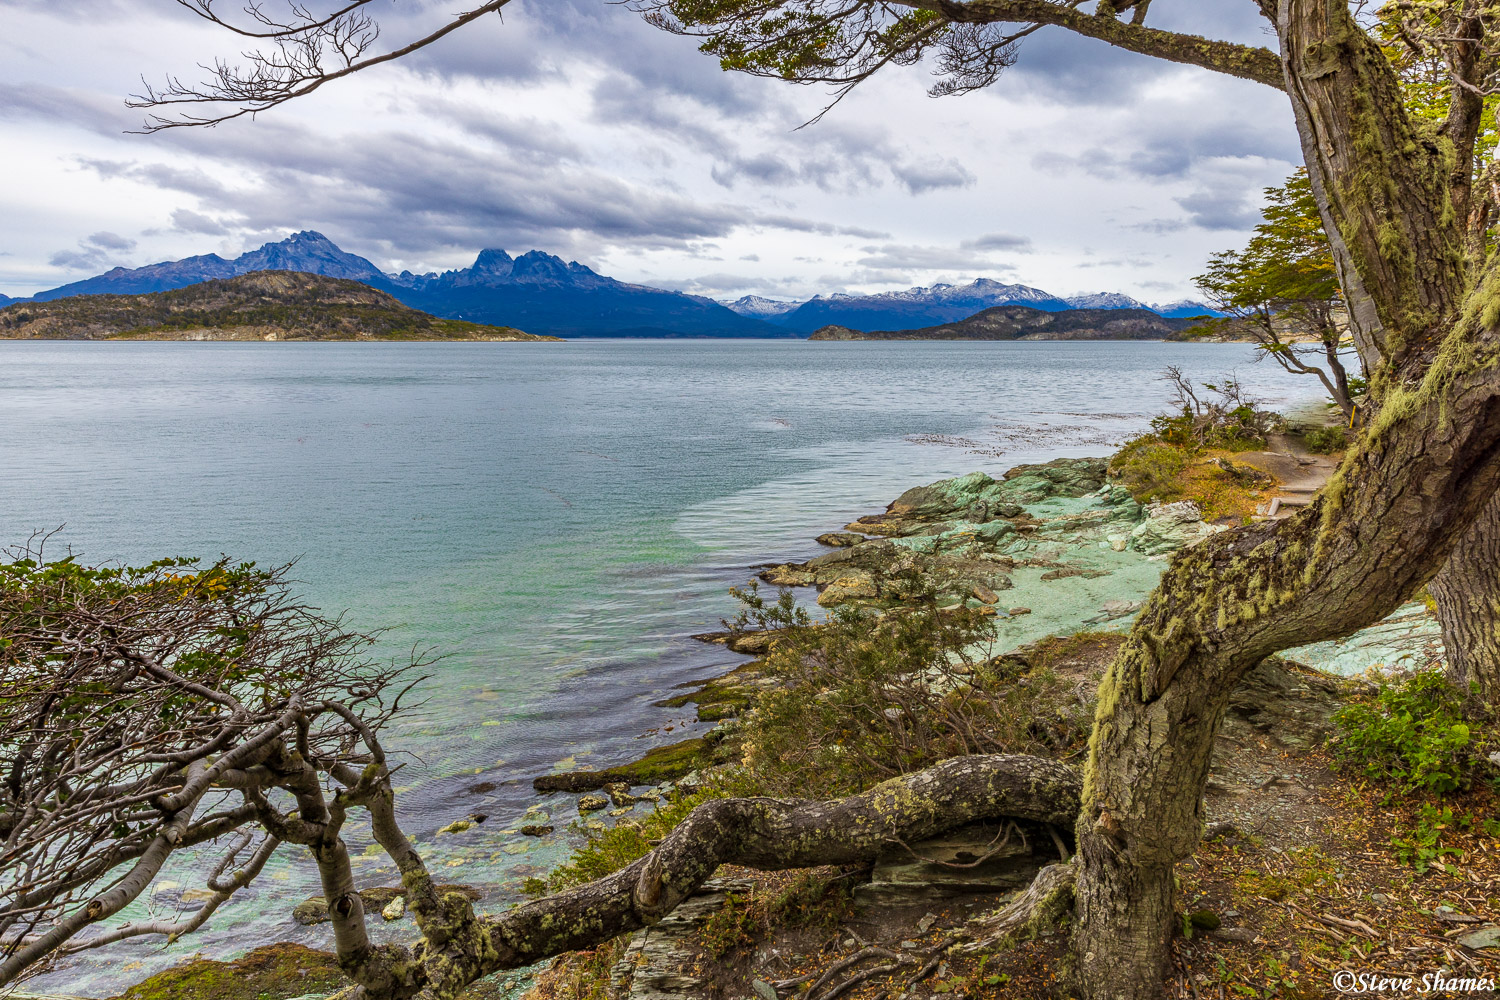 Looking across the Beagle Channel, at Tierra del Fuego National Park.